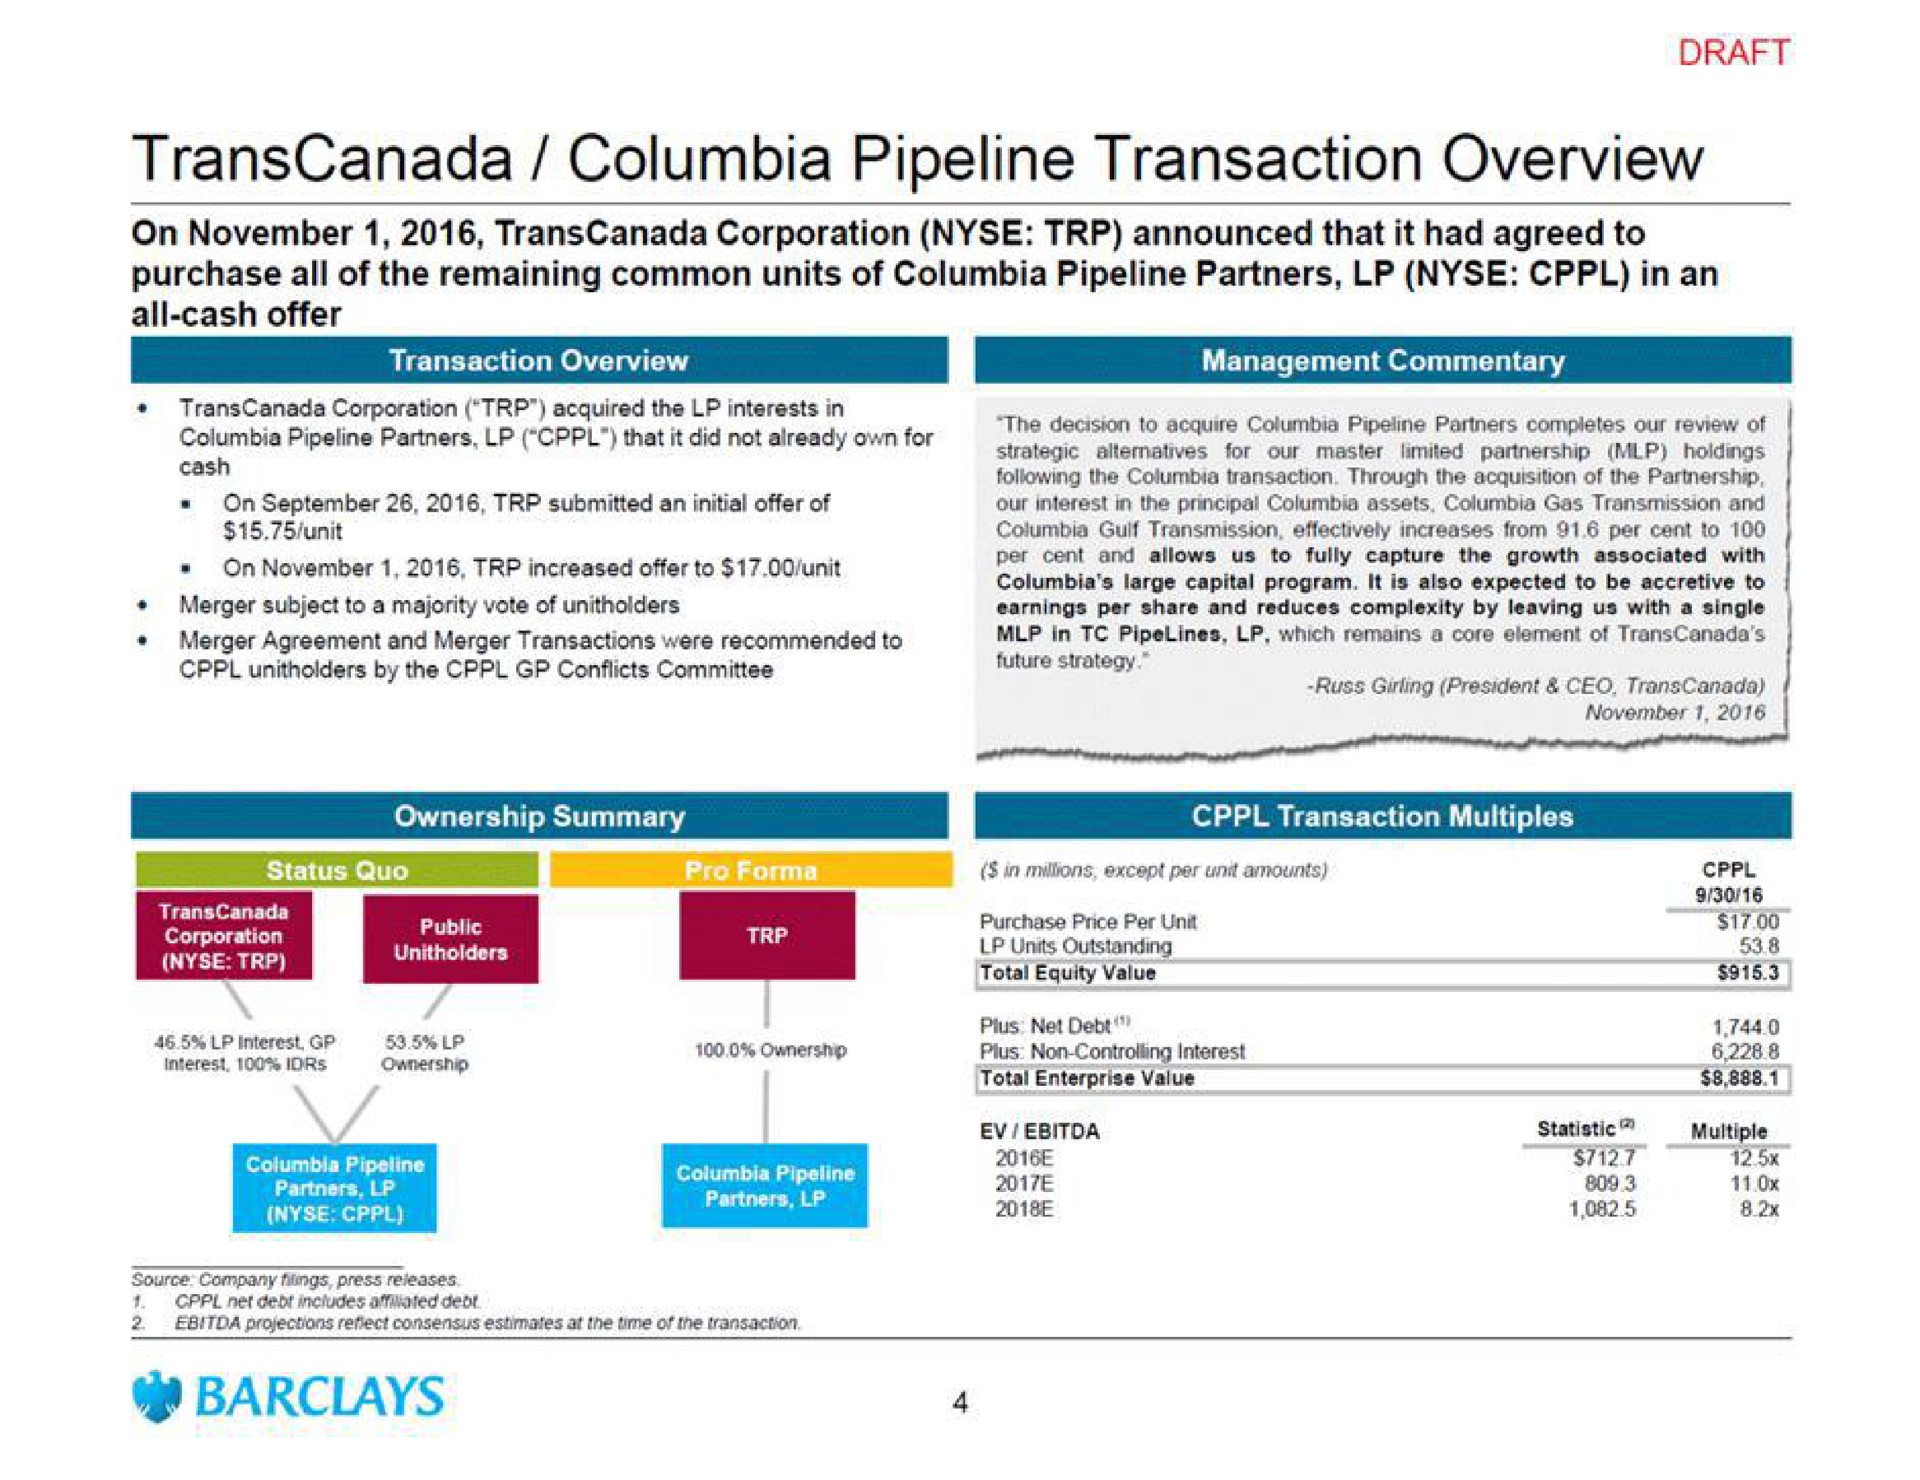 pipeline transaction overview | Barclays